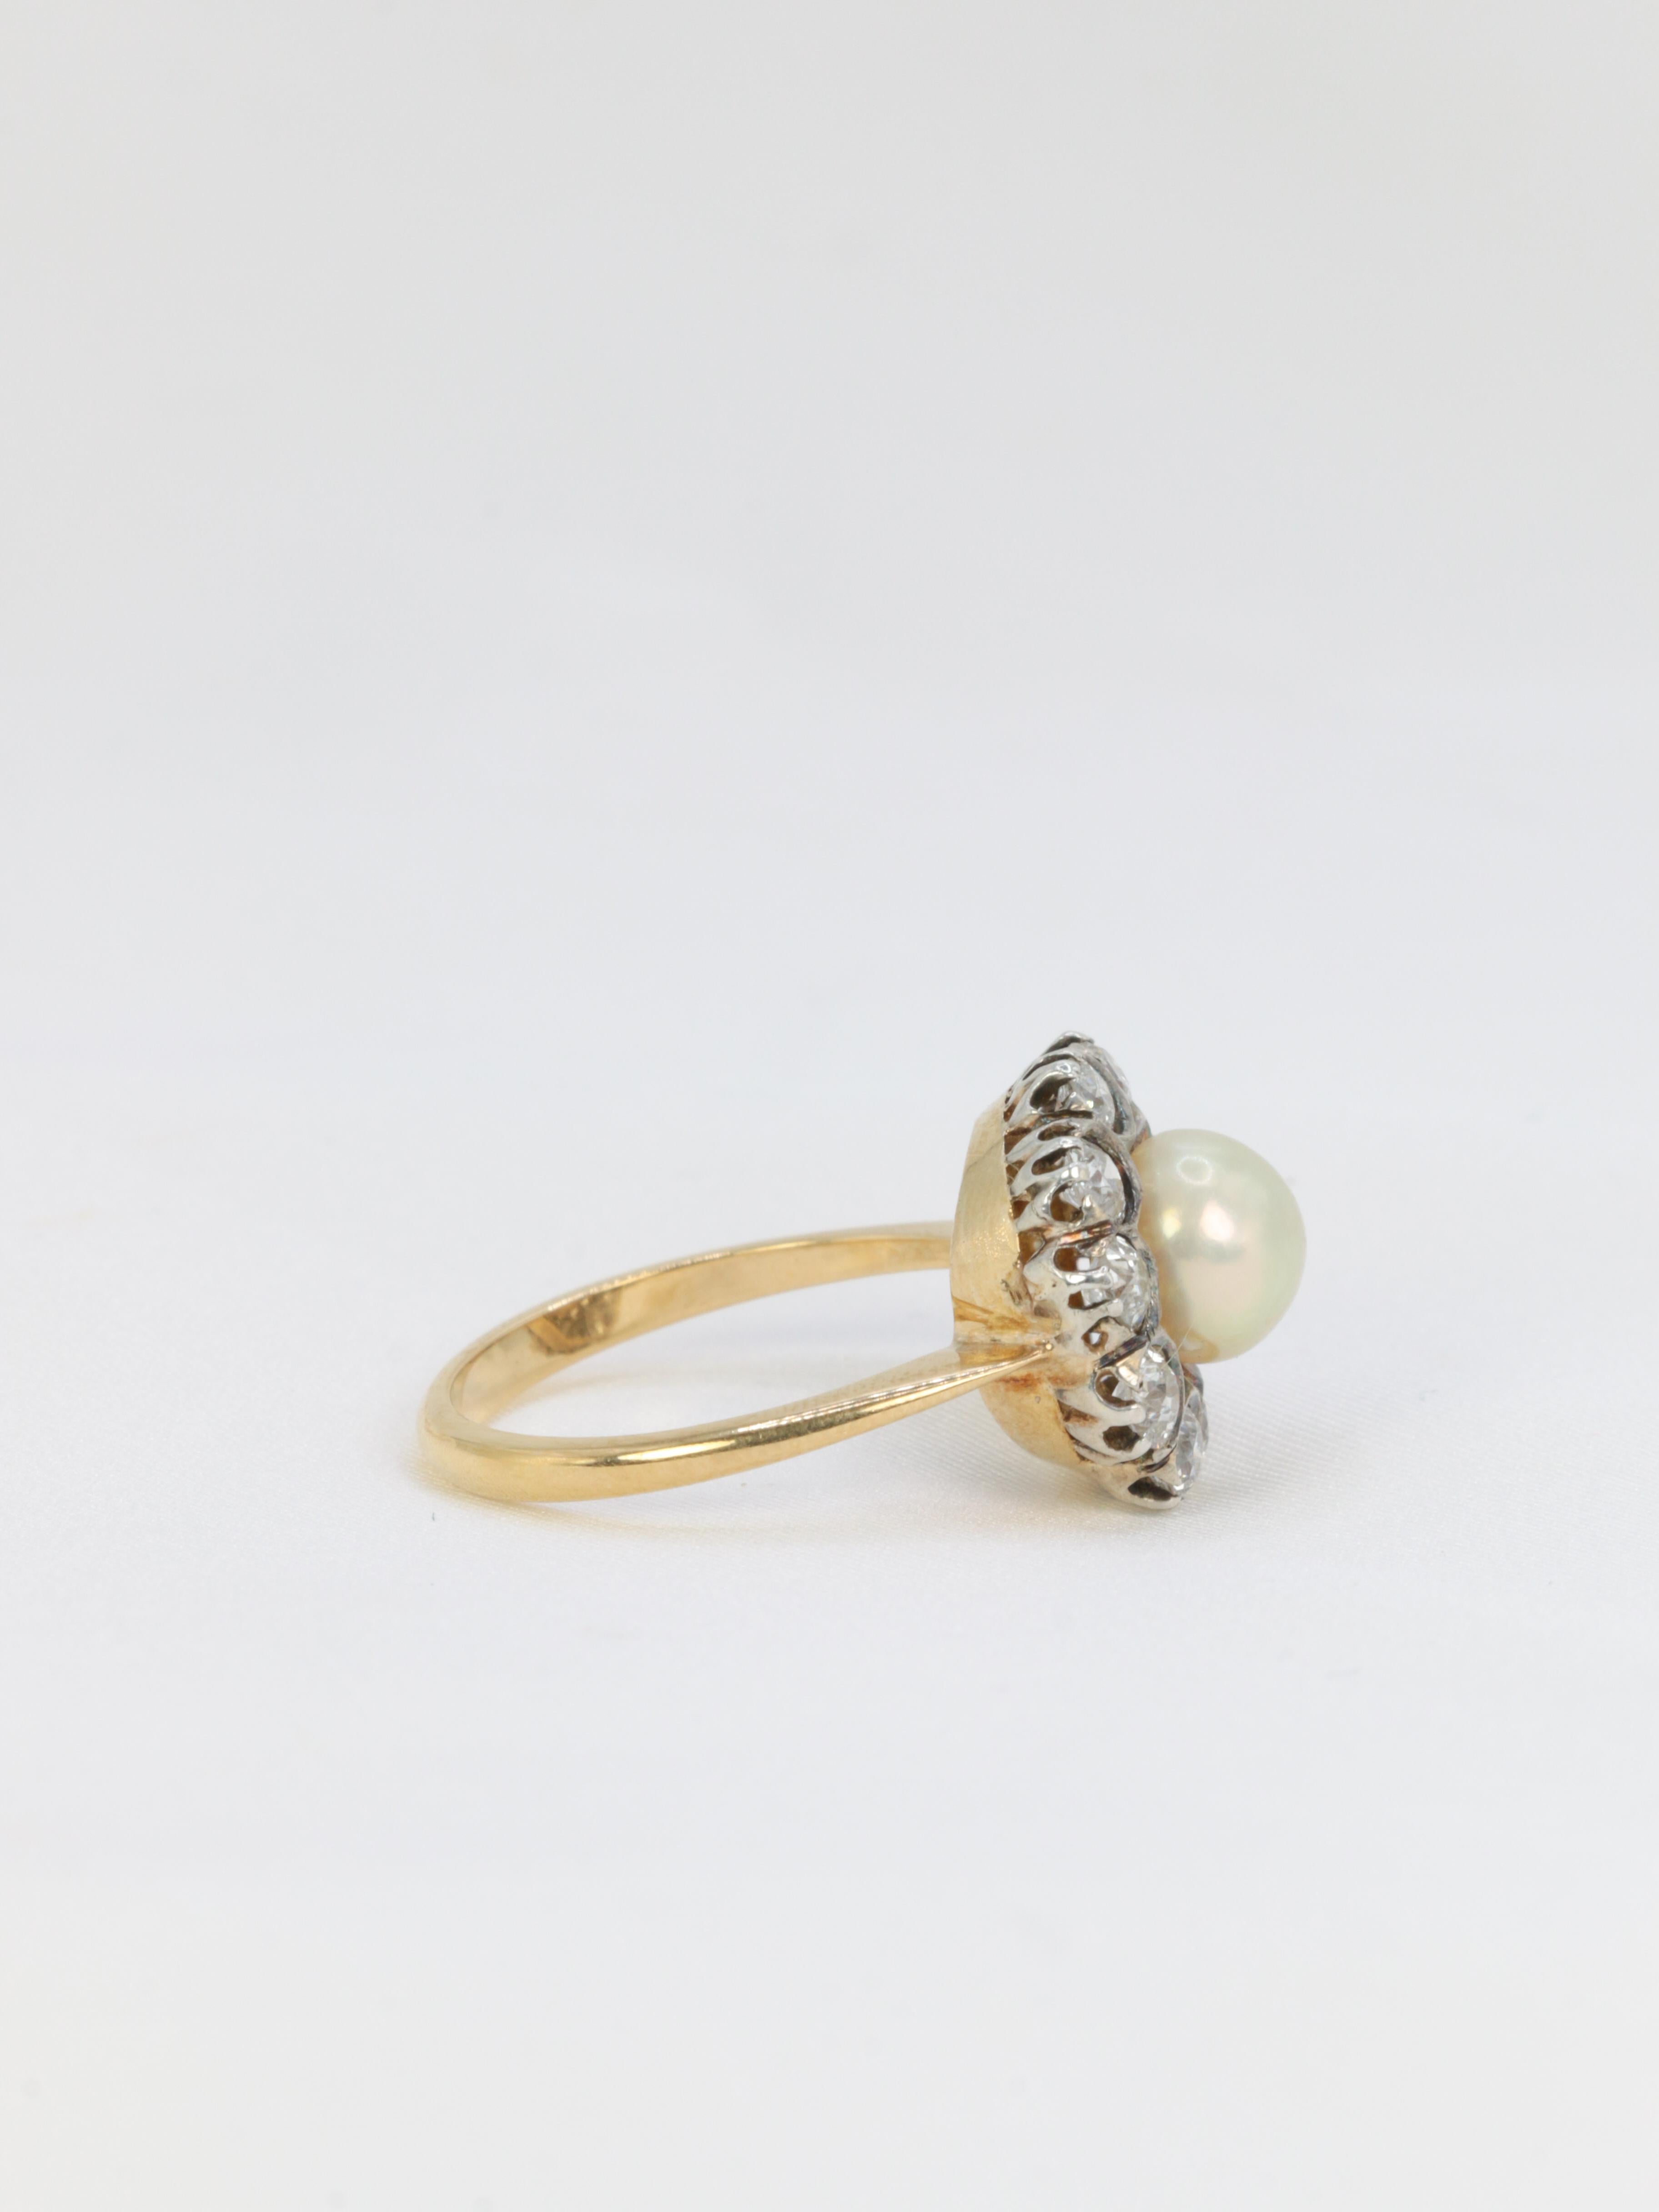 Women's or Men's Edwardian Gold and Silver Cluster Ring with Old Mine Cut Diamonds and a Natural For Sale